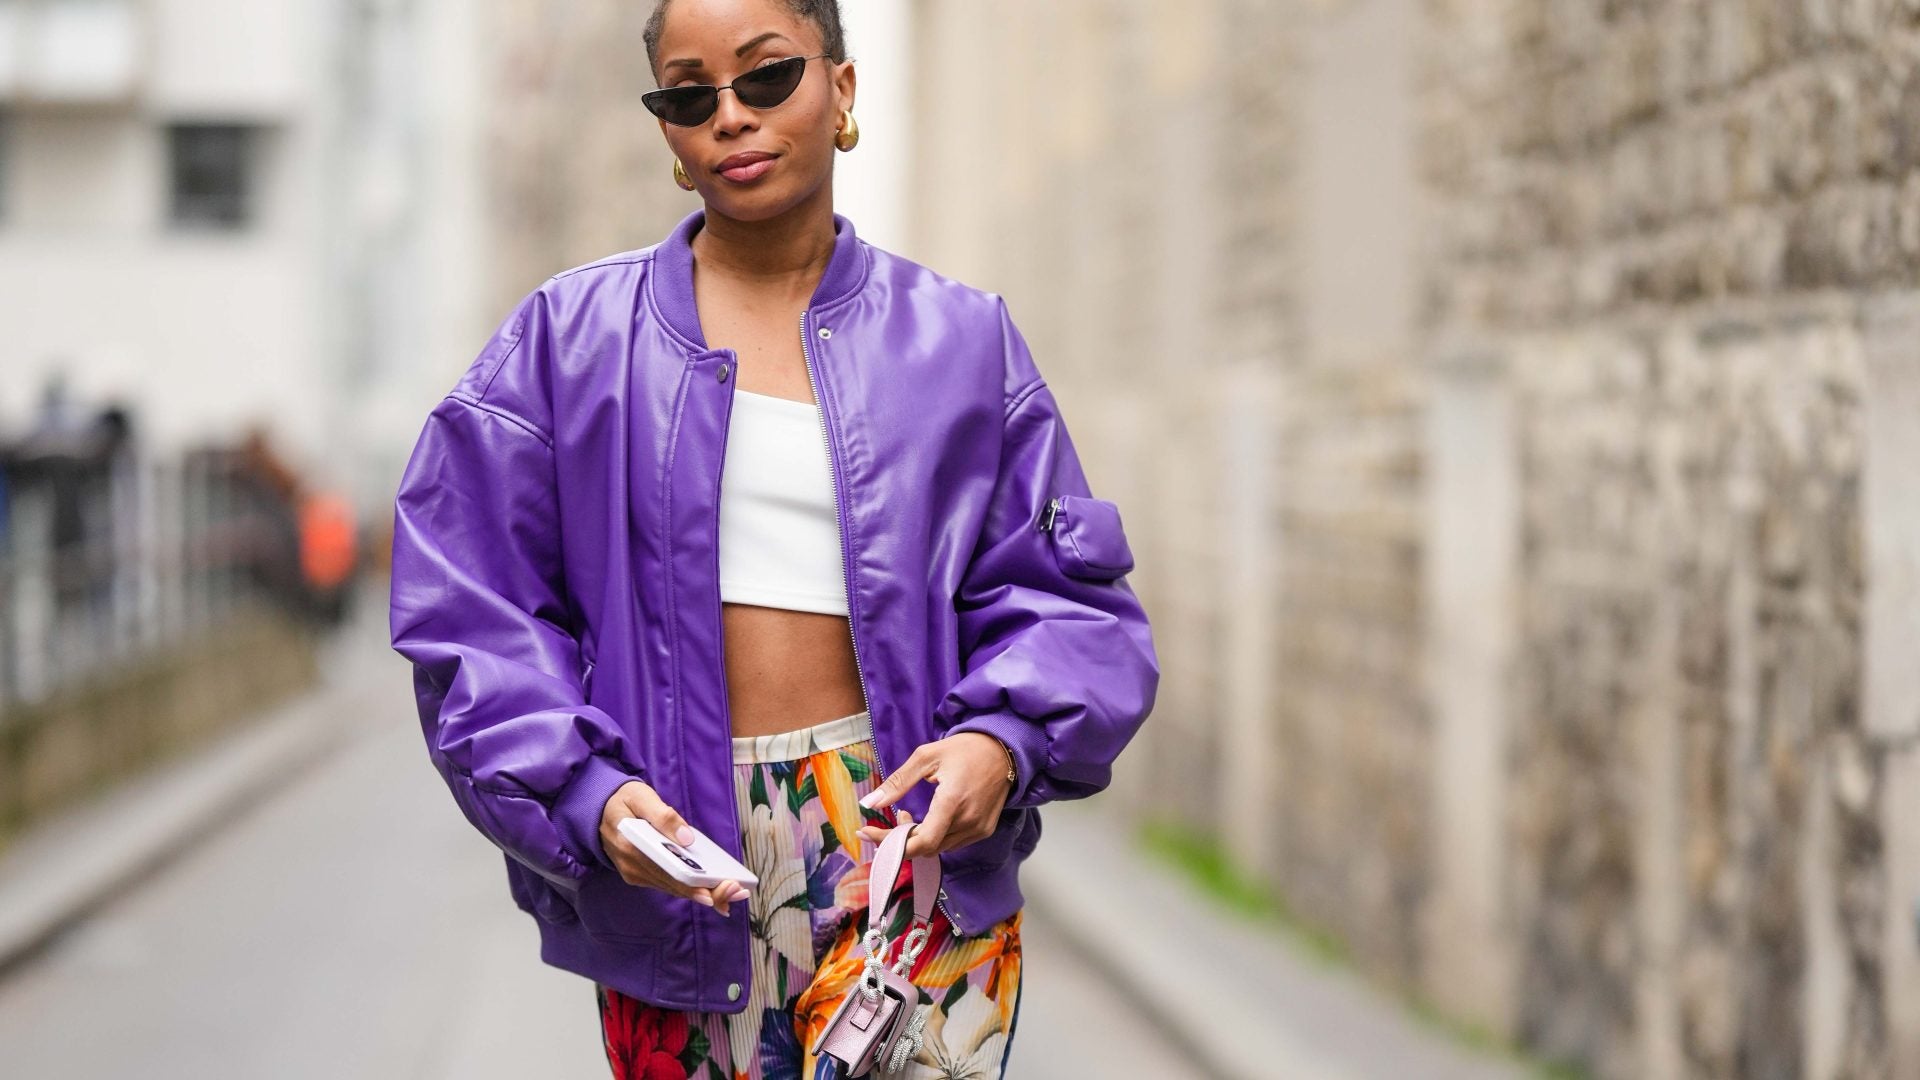 Bomber Jackets Are The Best Fall Jacket—Shop These 7 To Stay Warm And Stylish